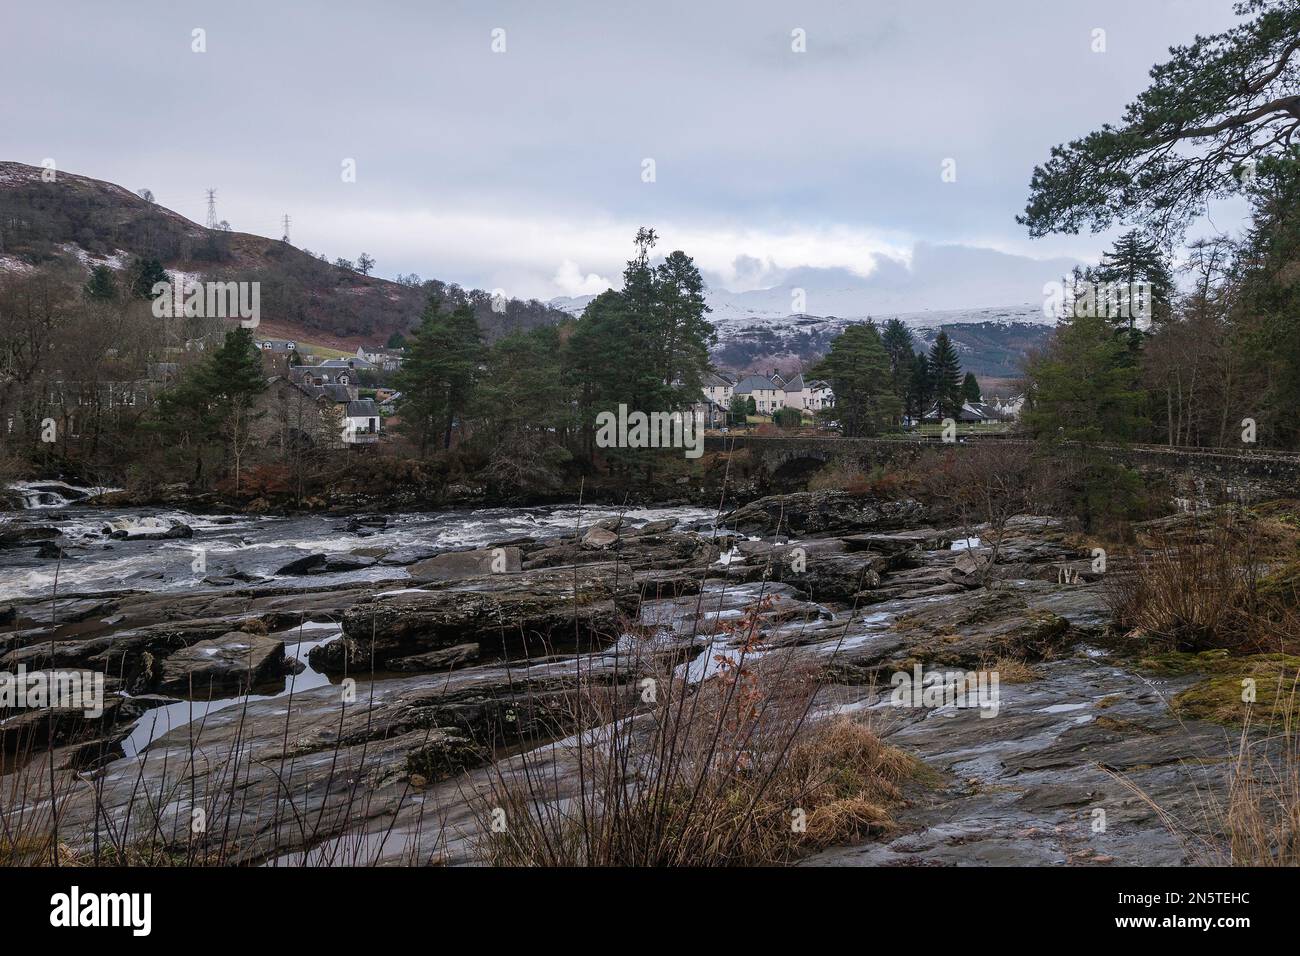 Falls of Dochart, and Bridge of Dochart, seen from the Rob Roy Way at Killin, Perthshire, Loch Lomond and the Trossachs National Park, Scotland. Stock Photo